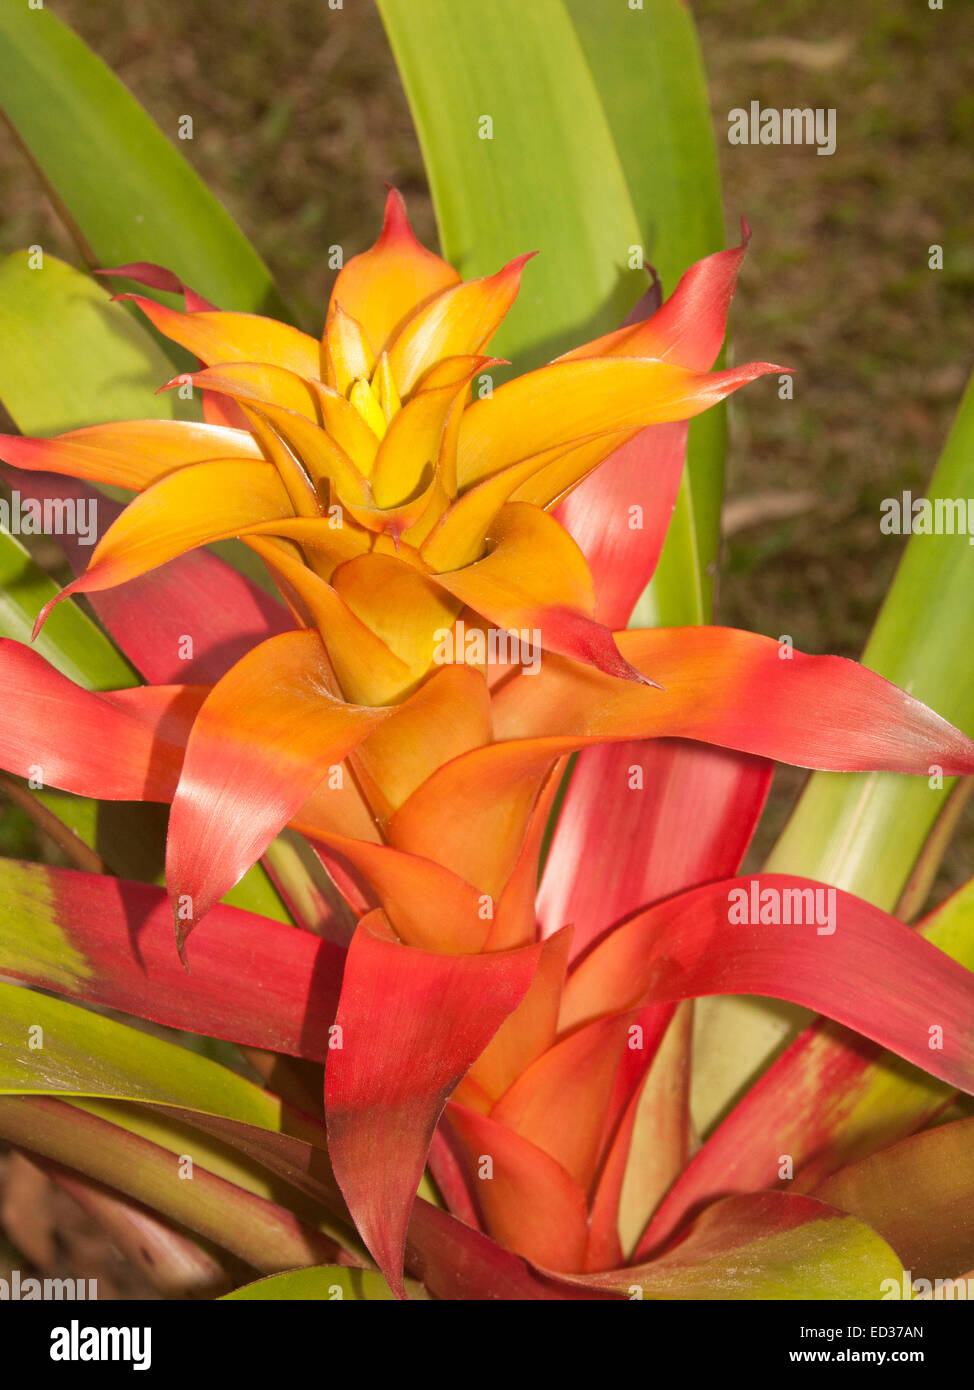 Stunning fiery red, orange, and yellow flower / bracts of bromeliad, Guzmania 'Marjan' with background of emerald leaves. Stock Photo